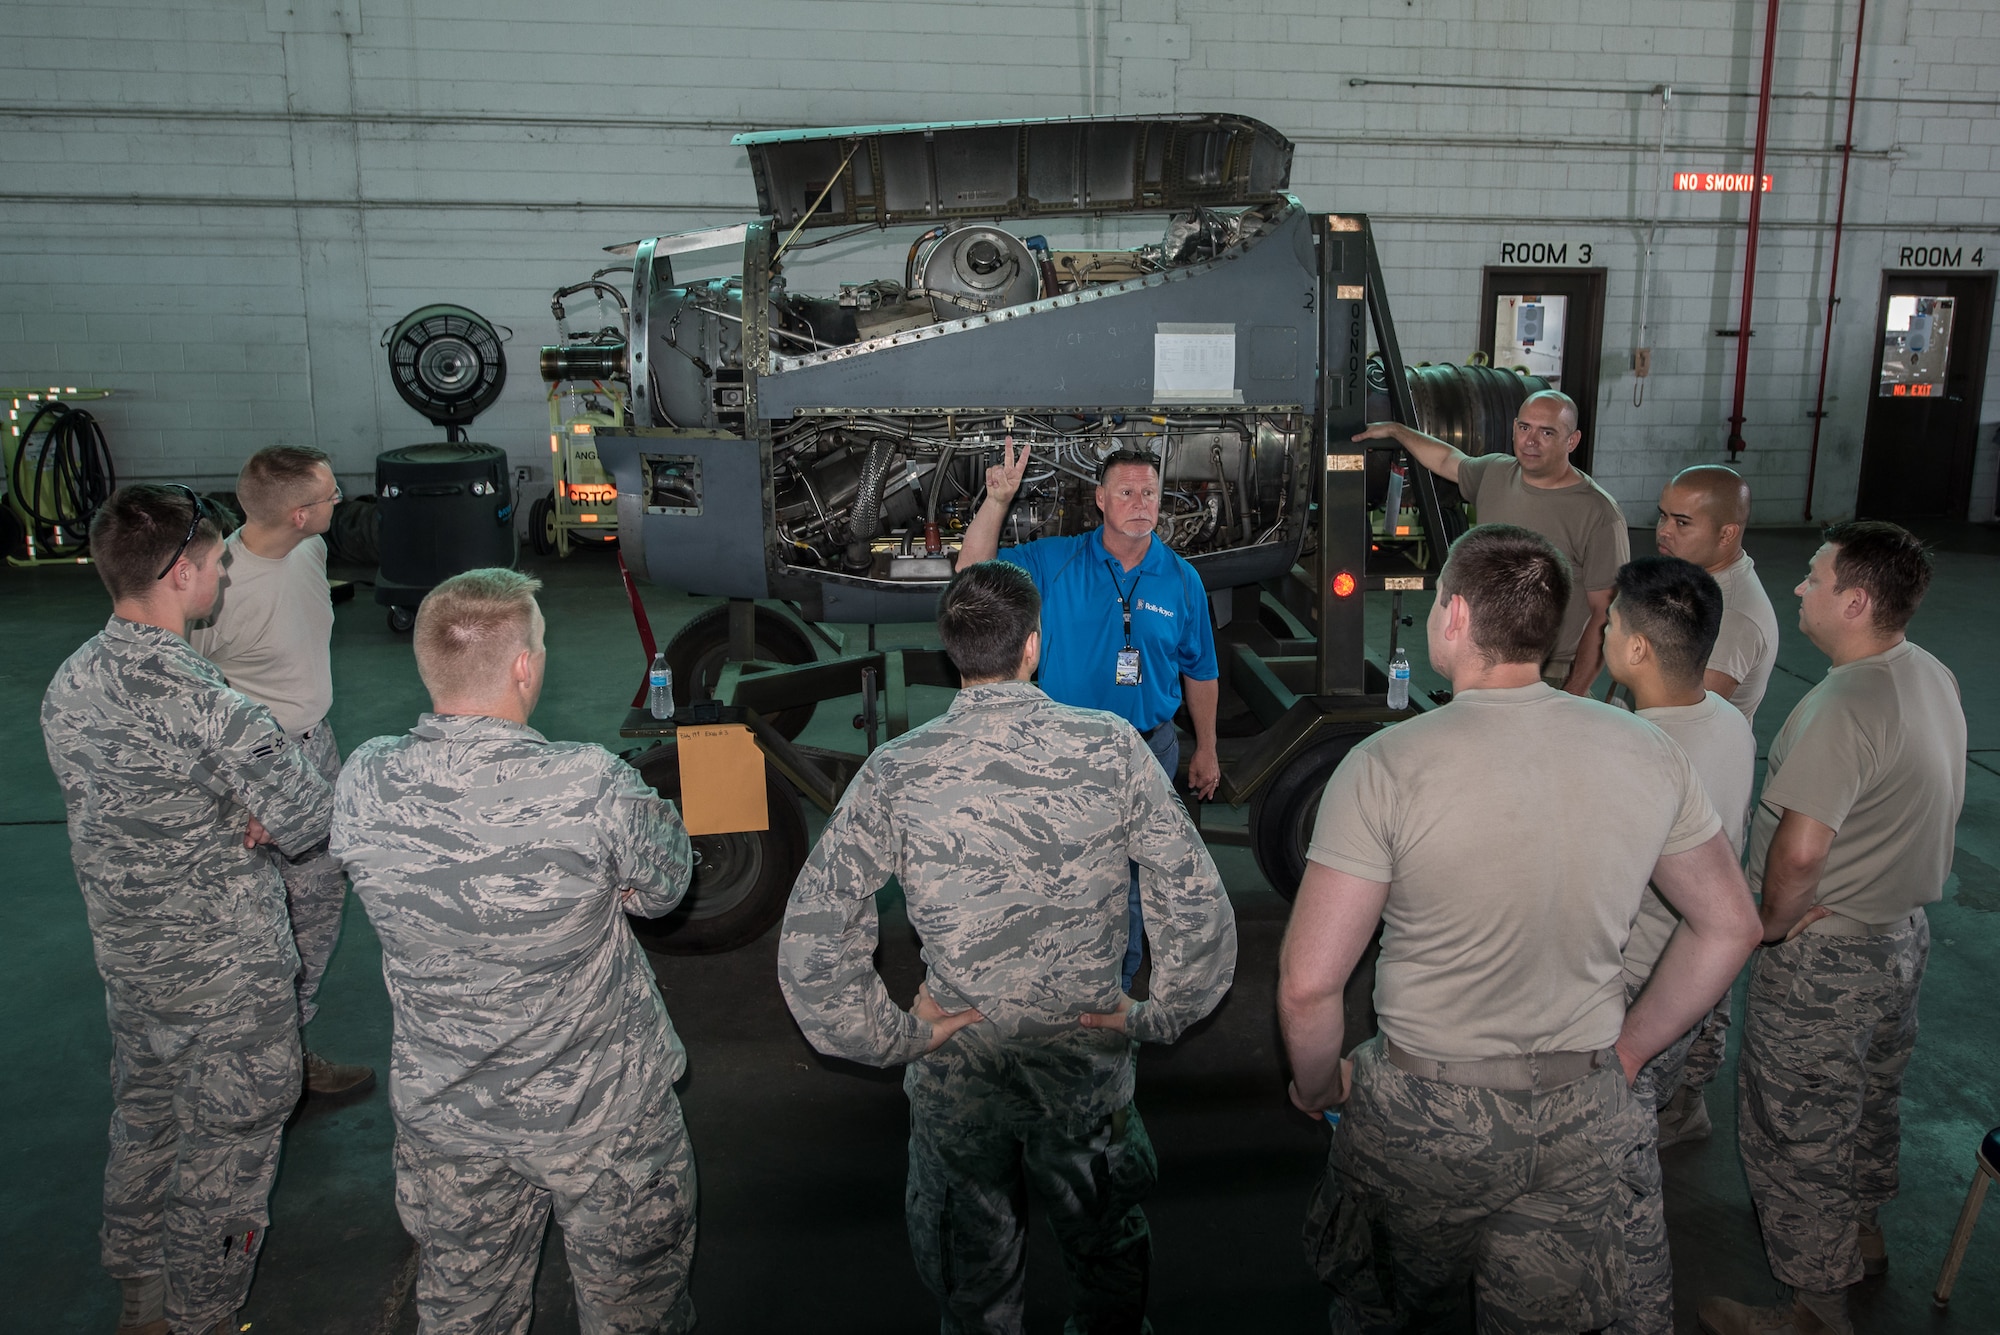 Roger Snow, a representative from Rolls-Royce North America, leads an engine familiarization class at Maintenance University in Savannah, Ga., May 20, 2019. The four-day intensive course was held at the Combat Readiness Training Center May 19 to 22.